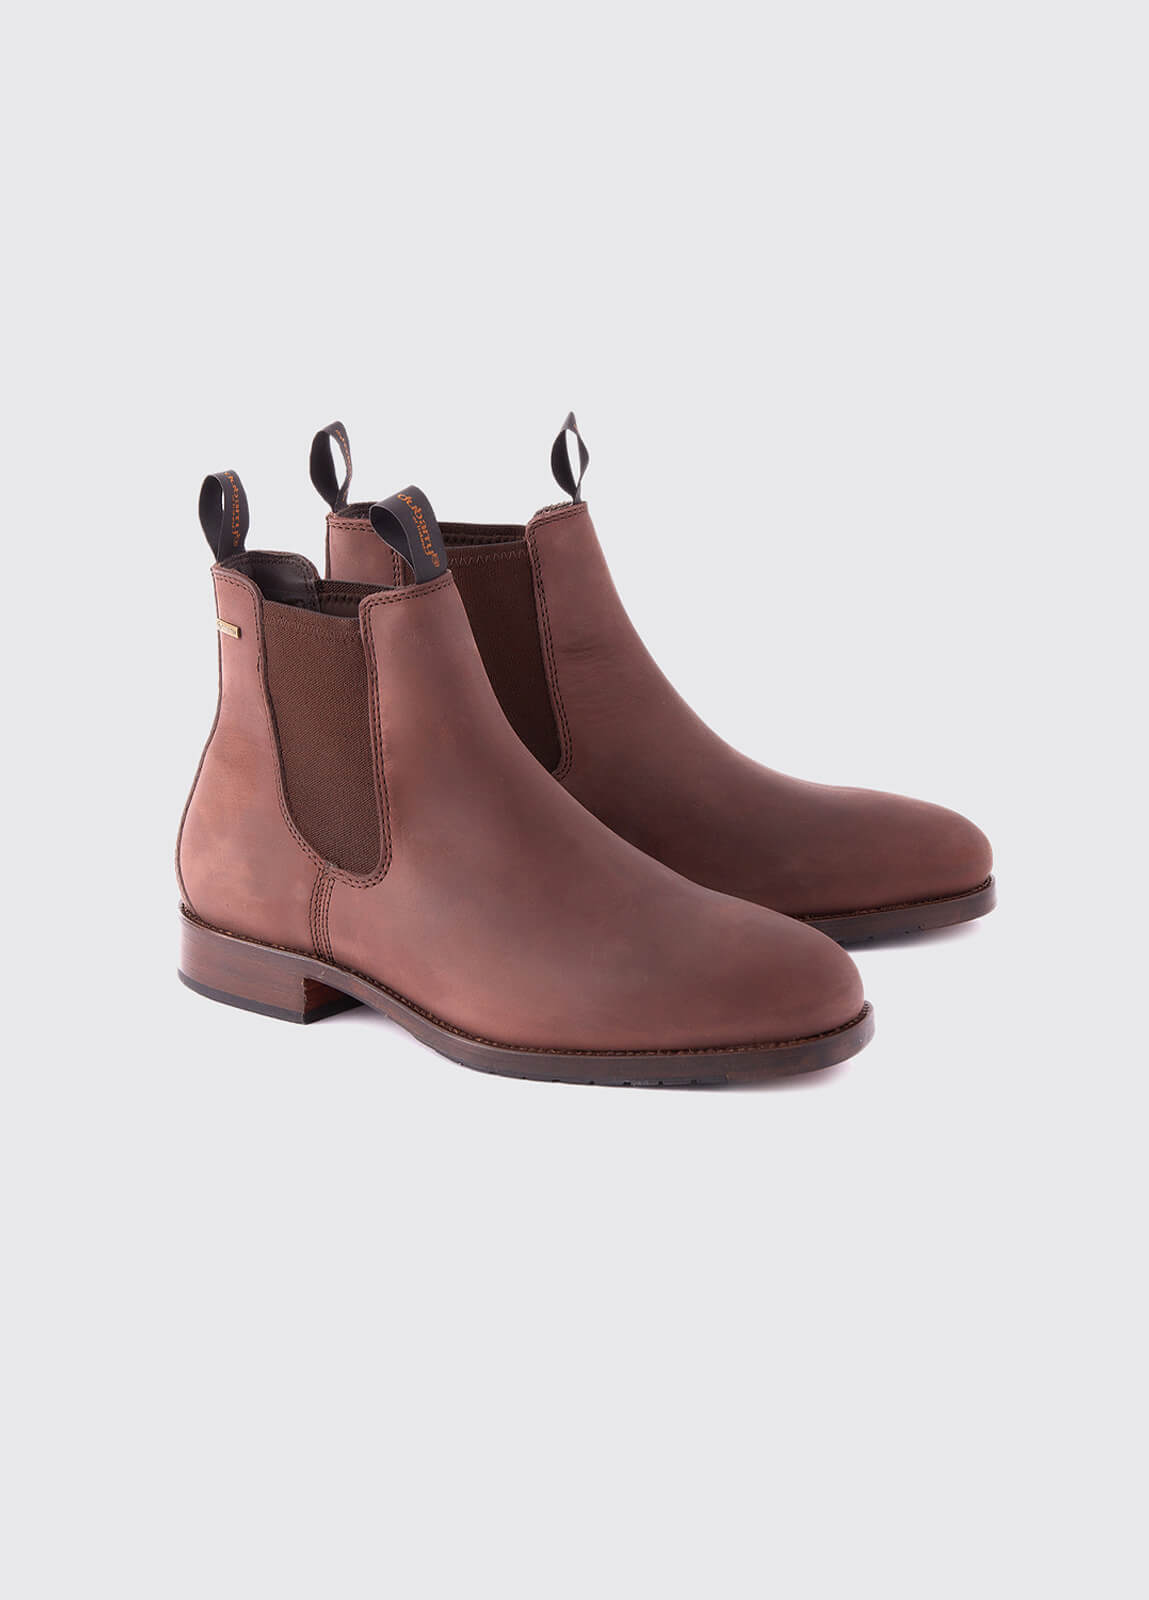 Kerry Leather Soled Boot - Old Rum